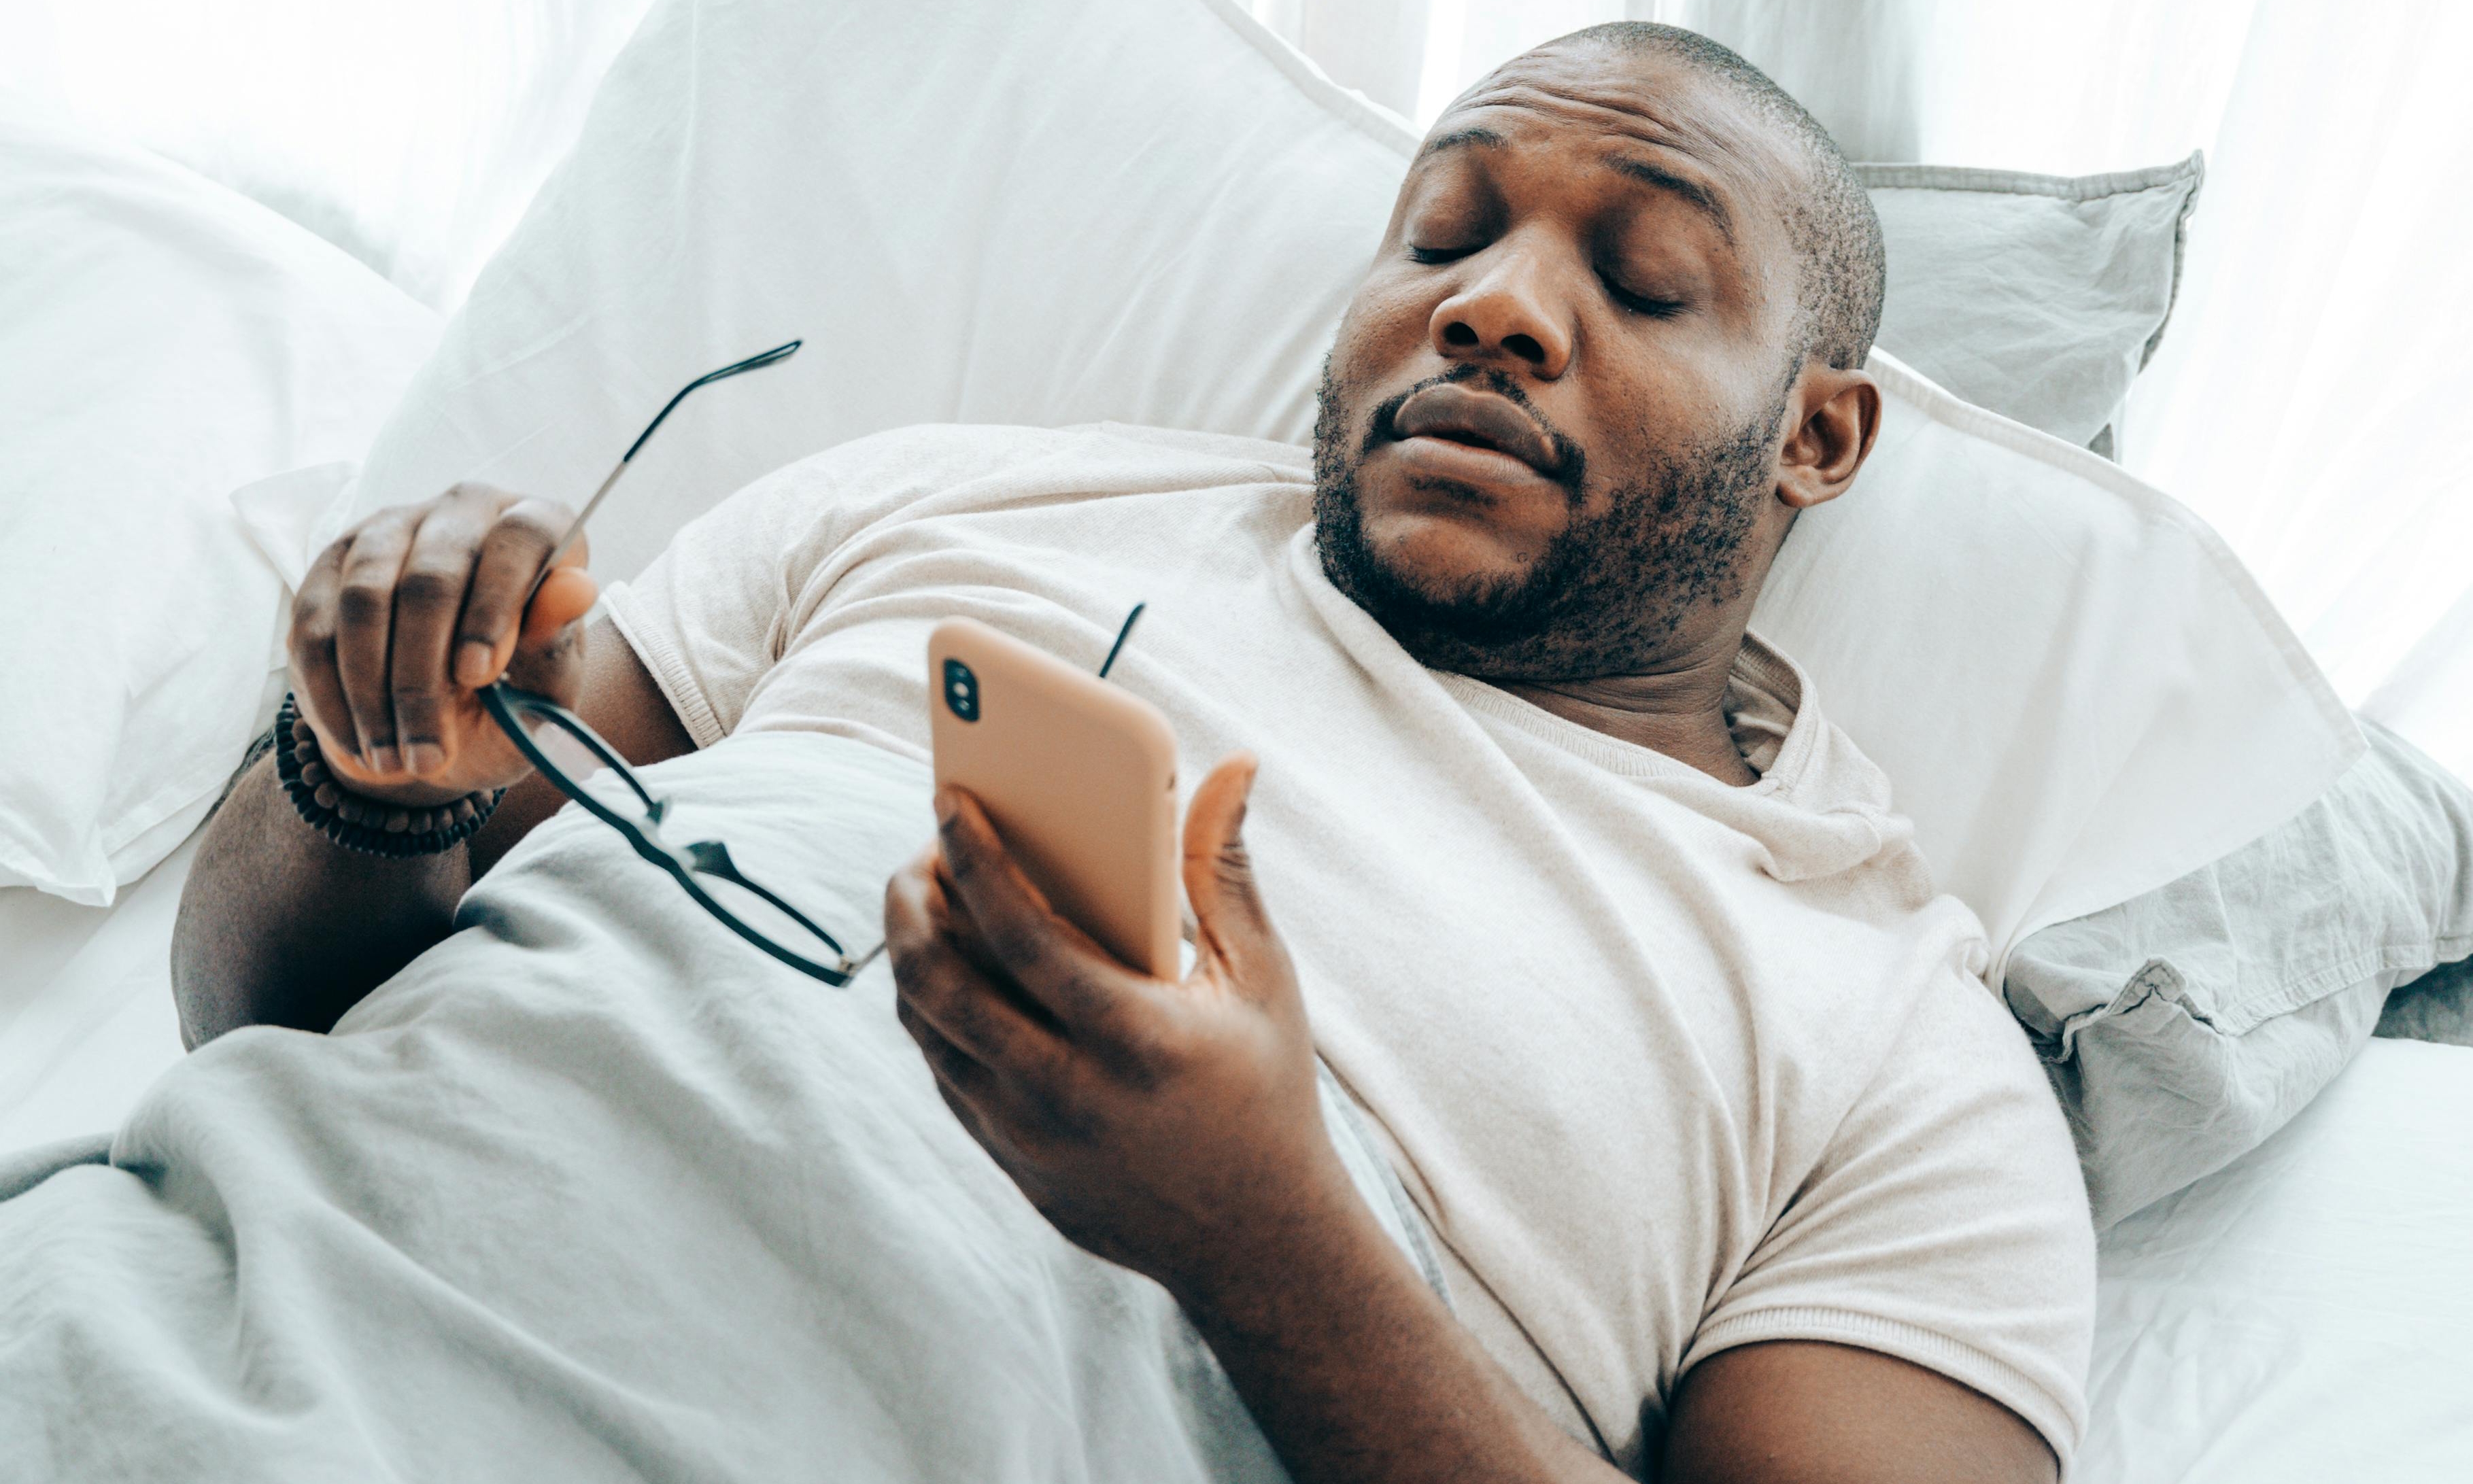 A tired-looking man holding a cell phone | Source: Pexels